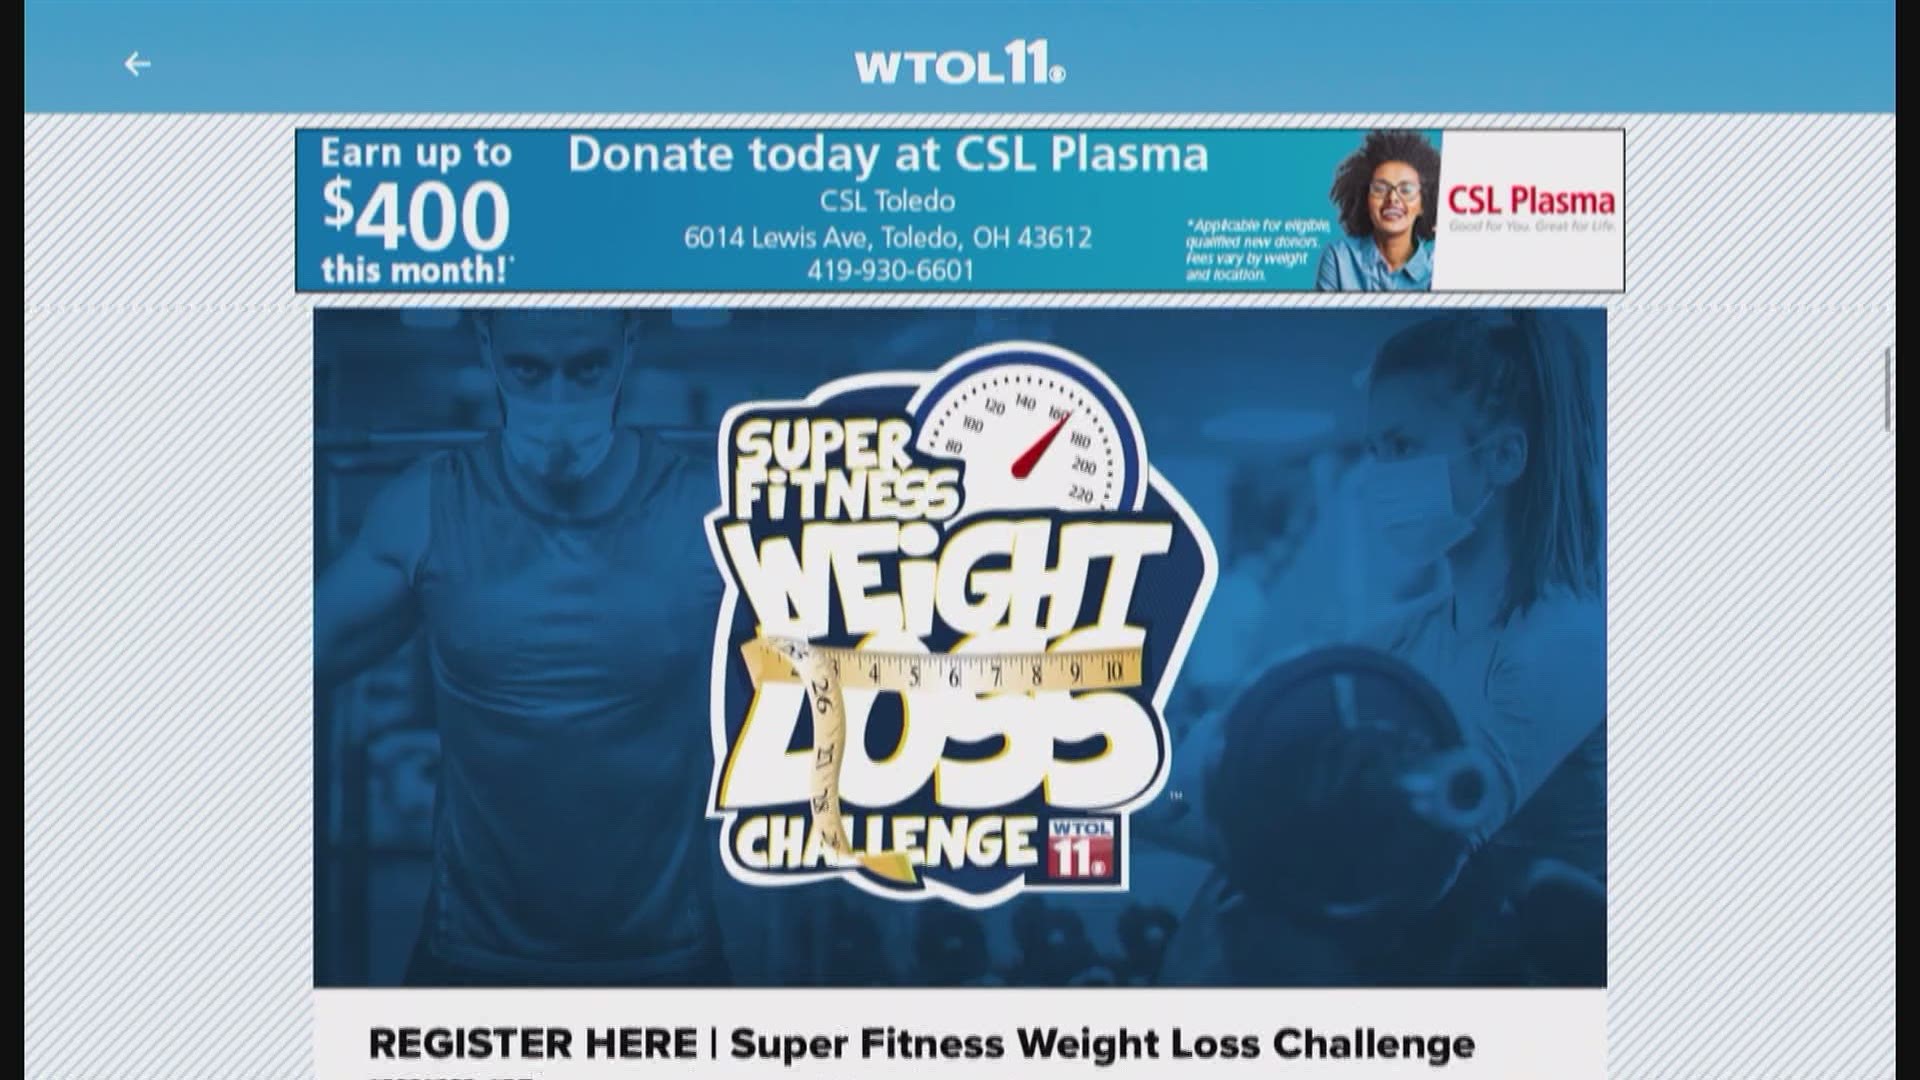 Kelly Heidbreder has all you need to know about getting involved in this year's Super Fitness Weight Loss Challenge.